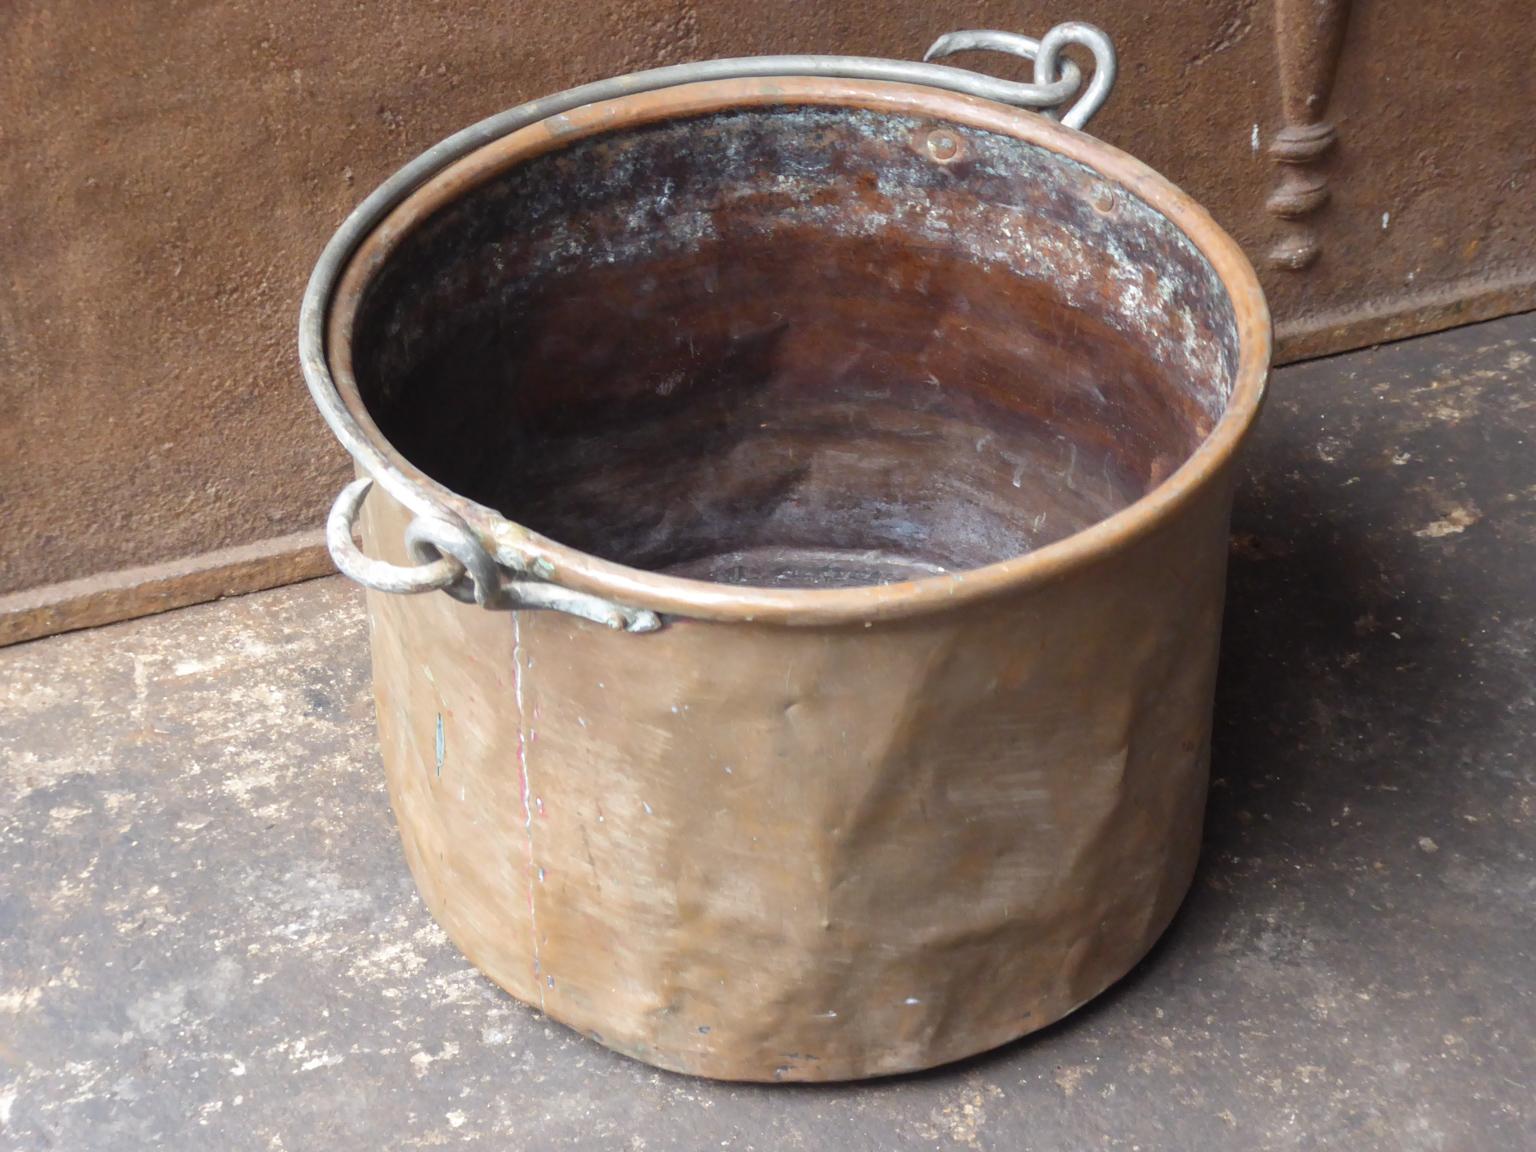 18th century Dutch log basket. The firewood basket is made of copper and has a wrought iron handle. The log holder is in a good condition and is fully functional. The total width of the basket including the handles is 49.0 cm (19.3 inch).